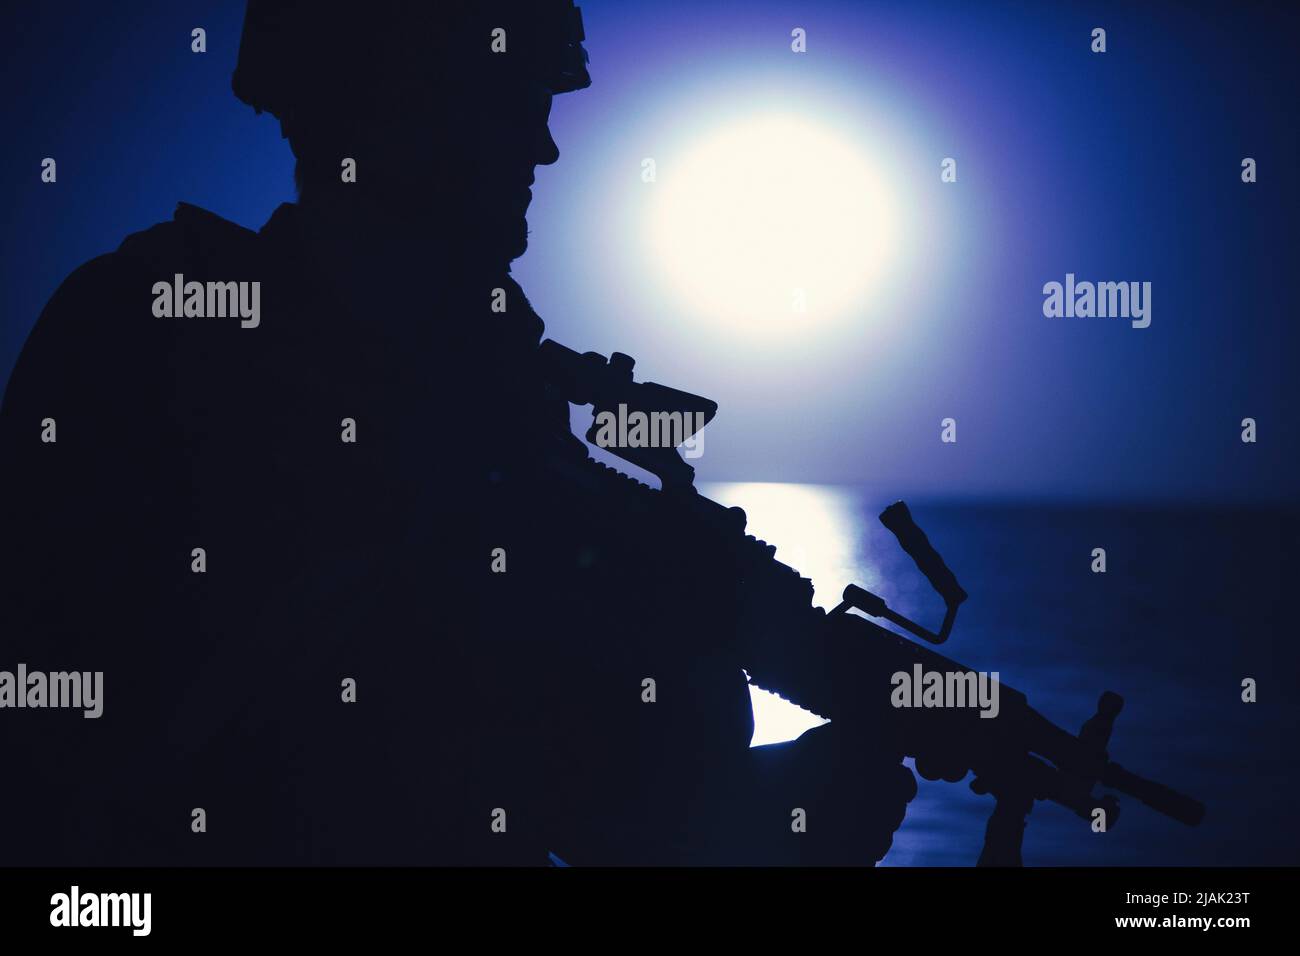 Silhouette of a soldier on patrolling coastline with machine gun, against a moonlit night sky. Stock Photo